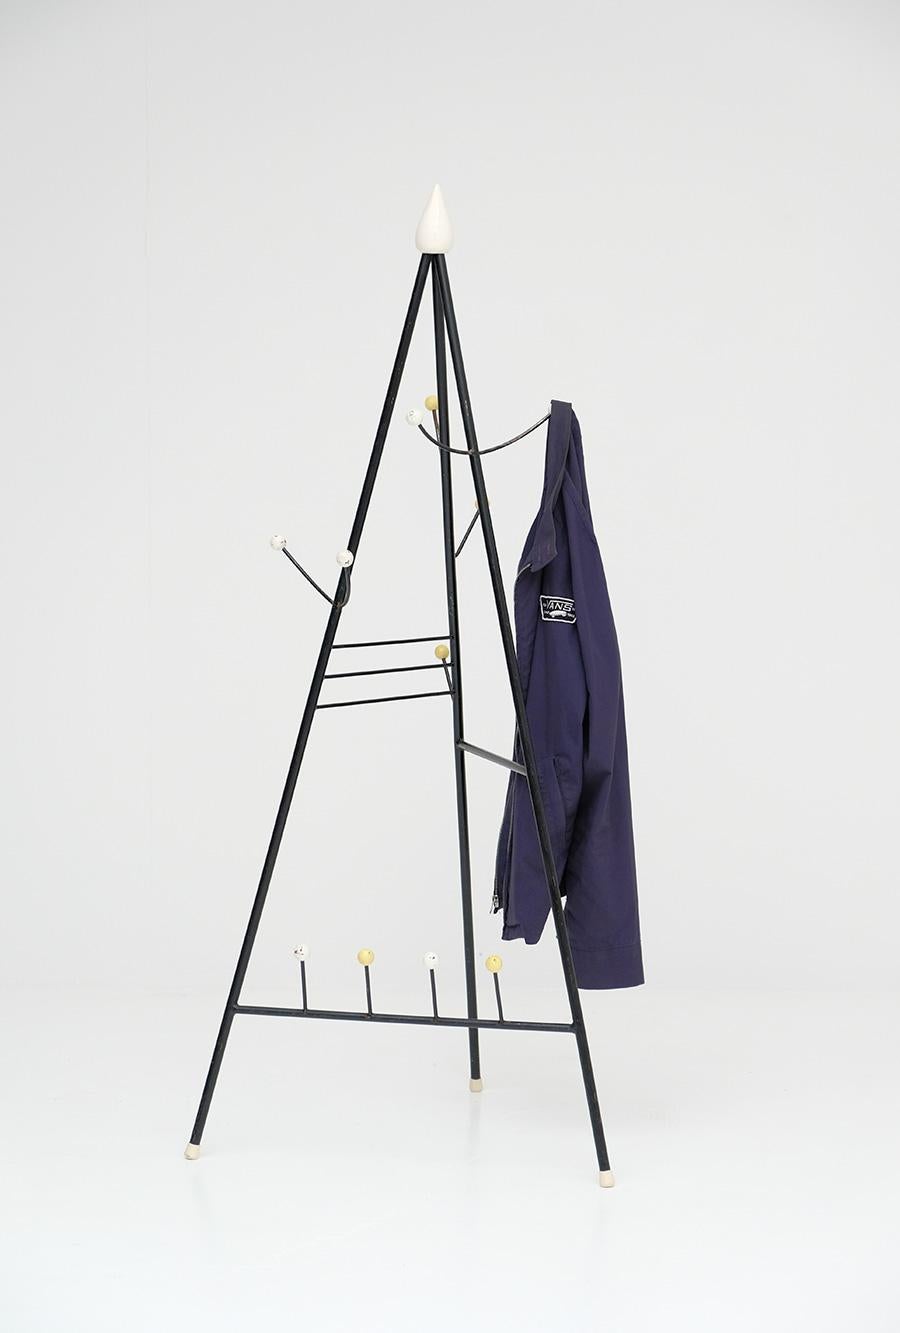 A rare and hard to find tipi shaped coat / hat and shoe stand. I only did find these in Belgium and this only for the 3th time in 20 years. Because of its playful shapes and color, it always reminds me on the work of painter Joan Miro. The coat